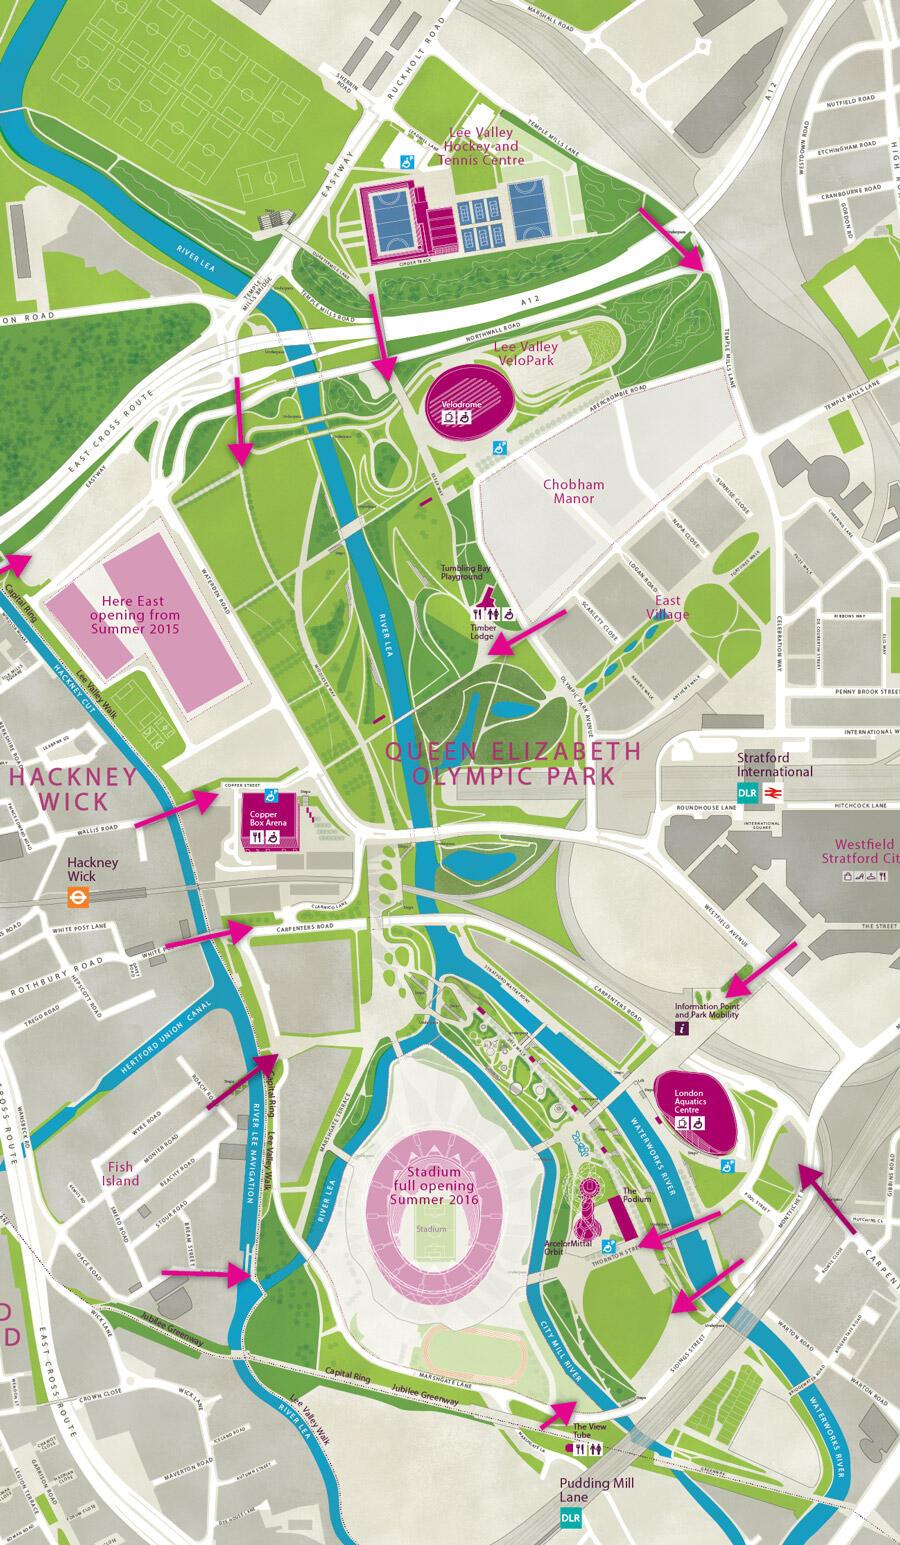 New routes in and around Queen Elizabeth Olympic Park